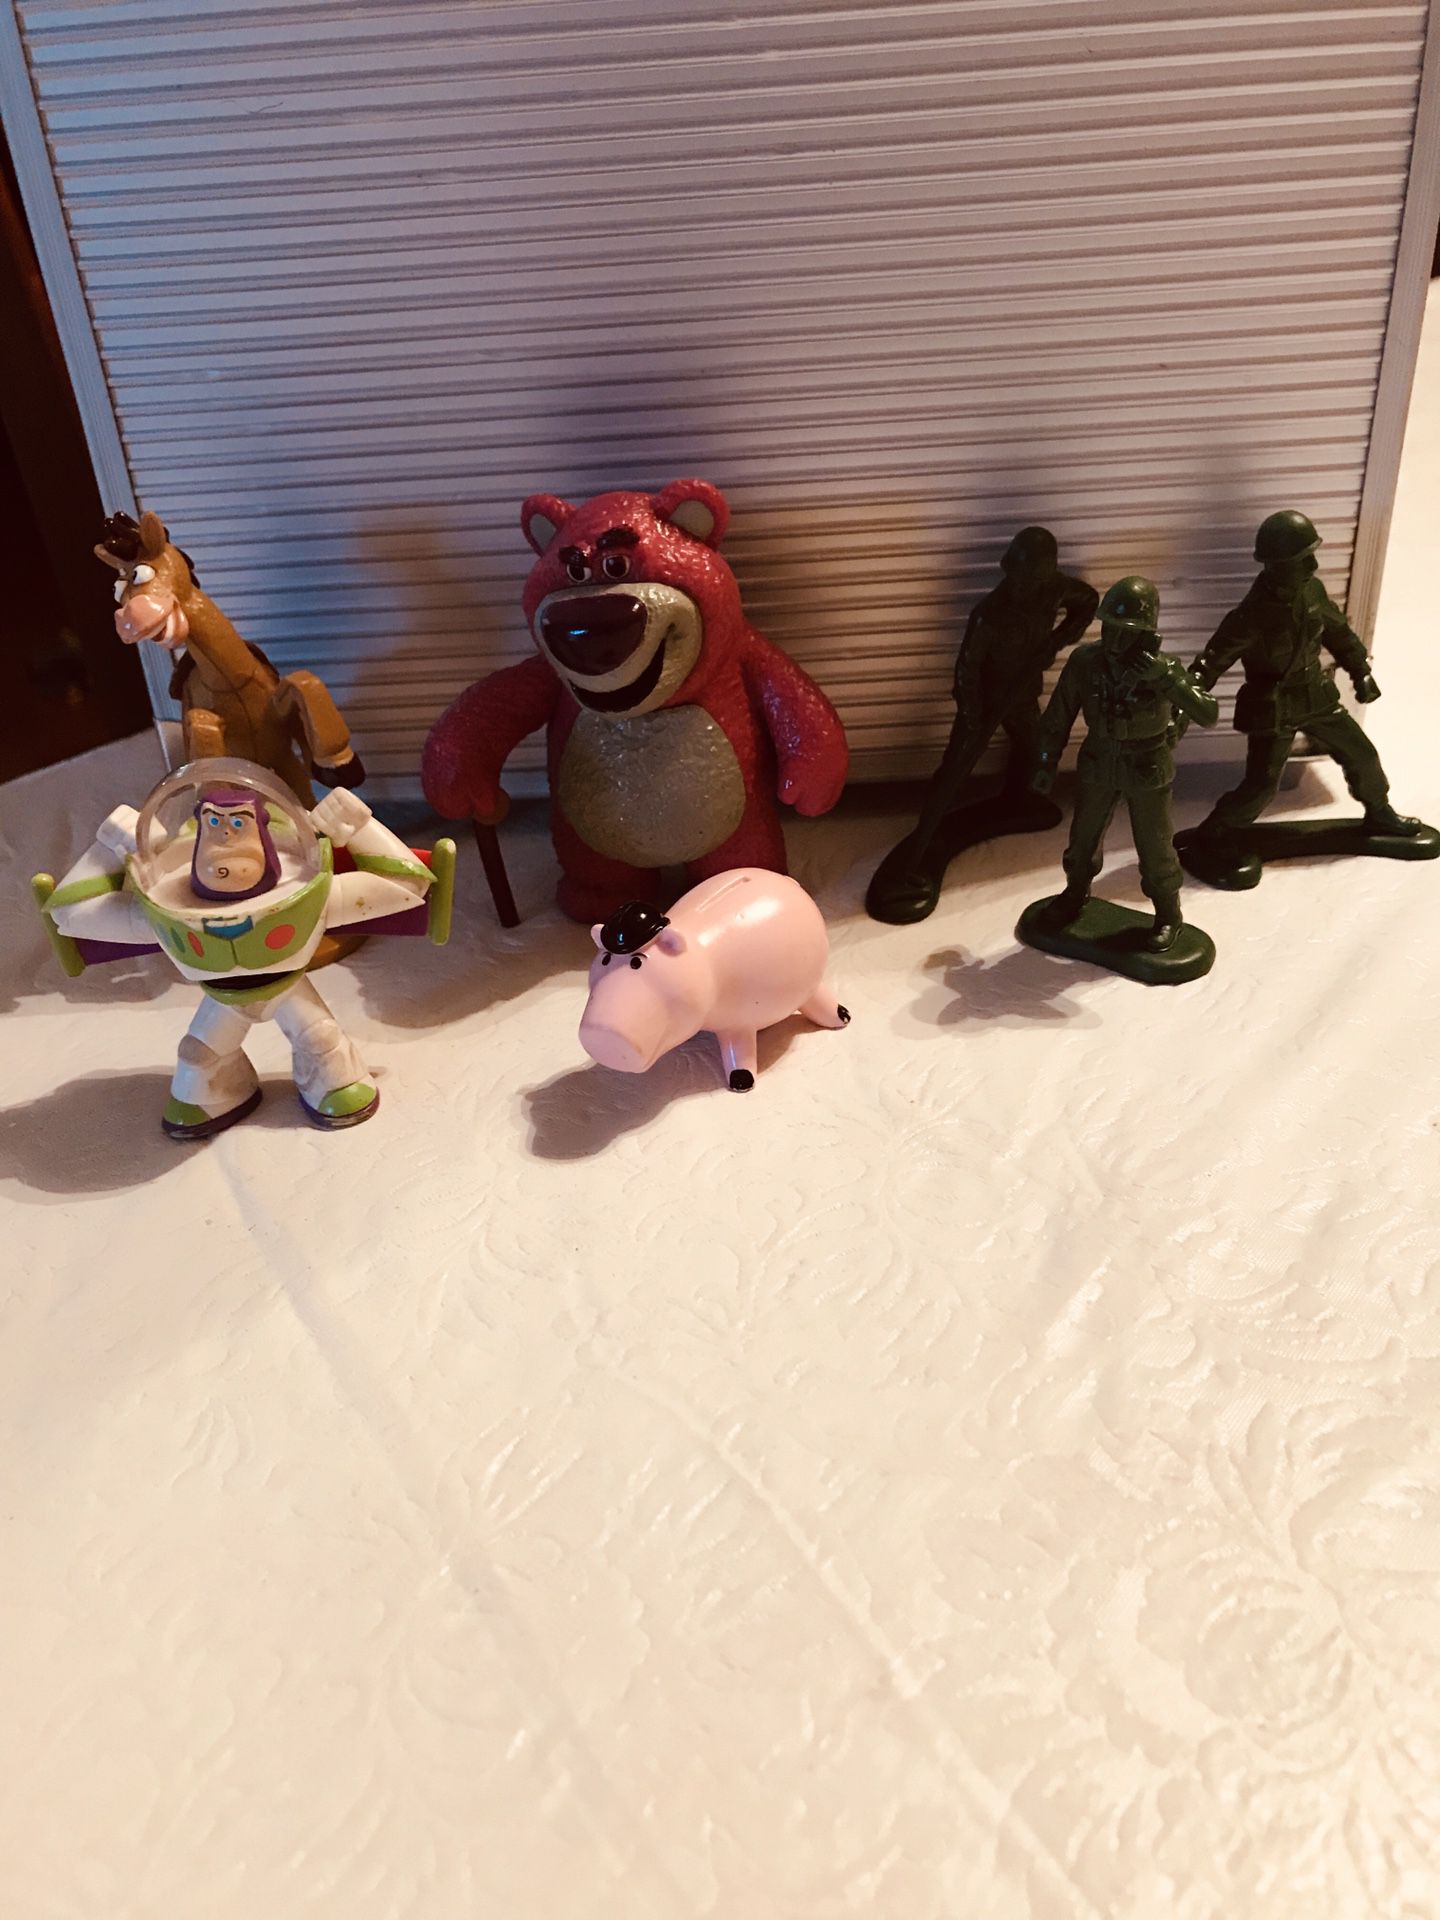 Toy Story figures for the movies 1,2 & 3 (3) Burger King, i think 🤔 the others are from 2 and 3